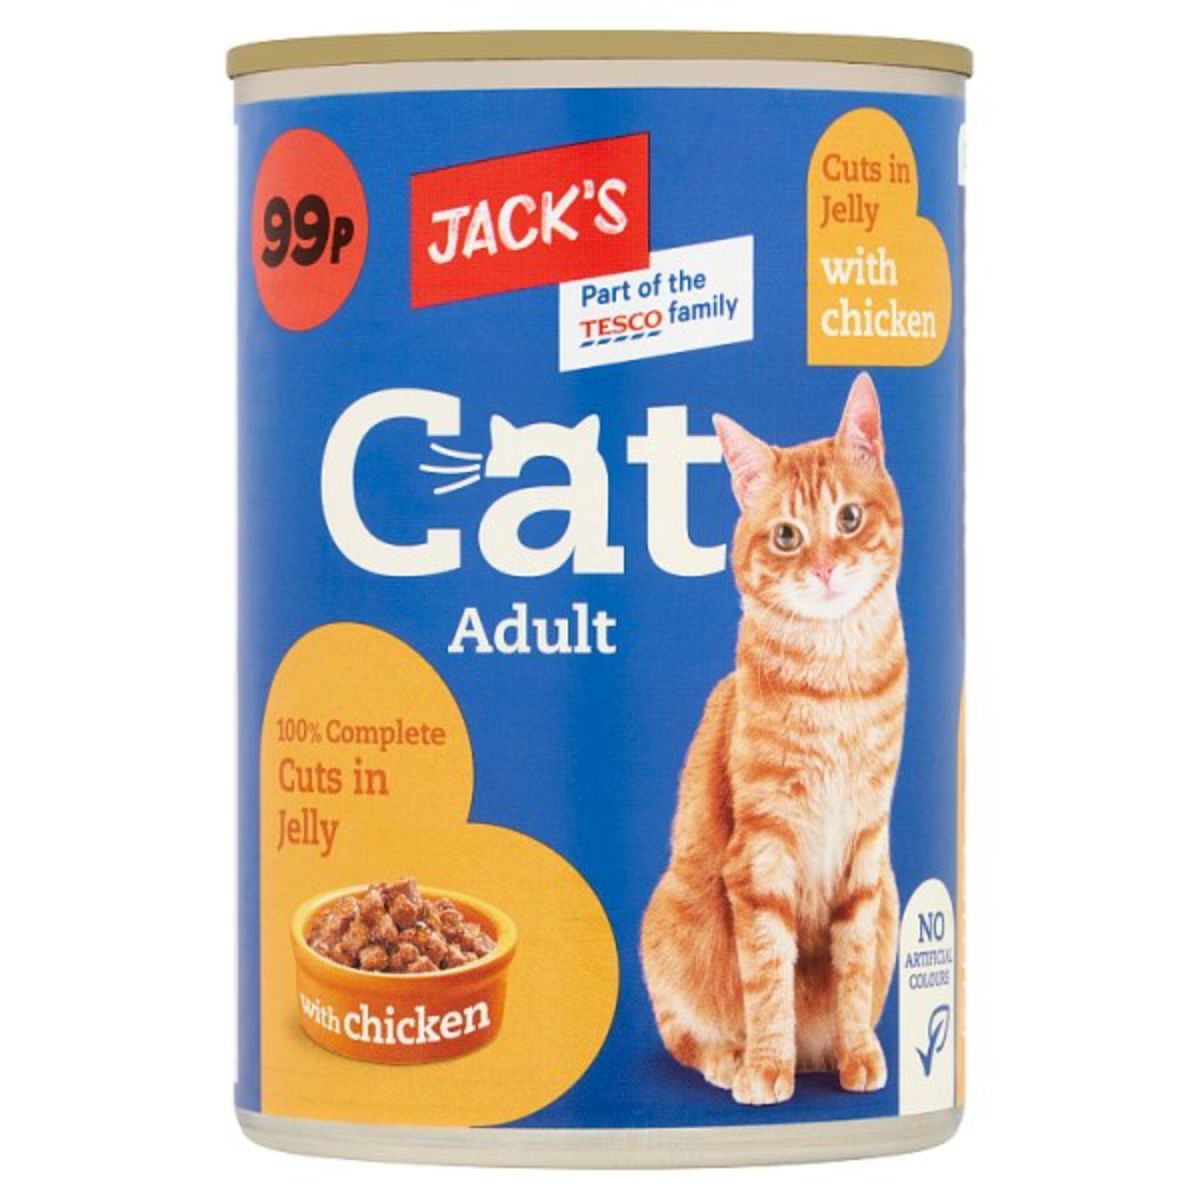 Jack's Cat Adult Cut in jelly with Chicken - 415g canned food.